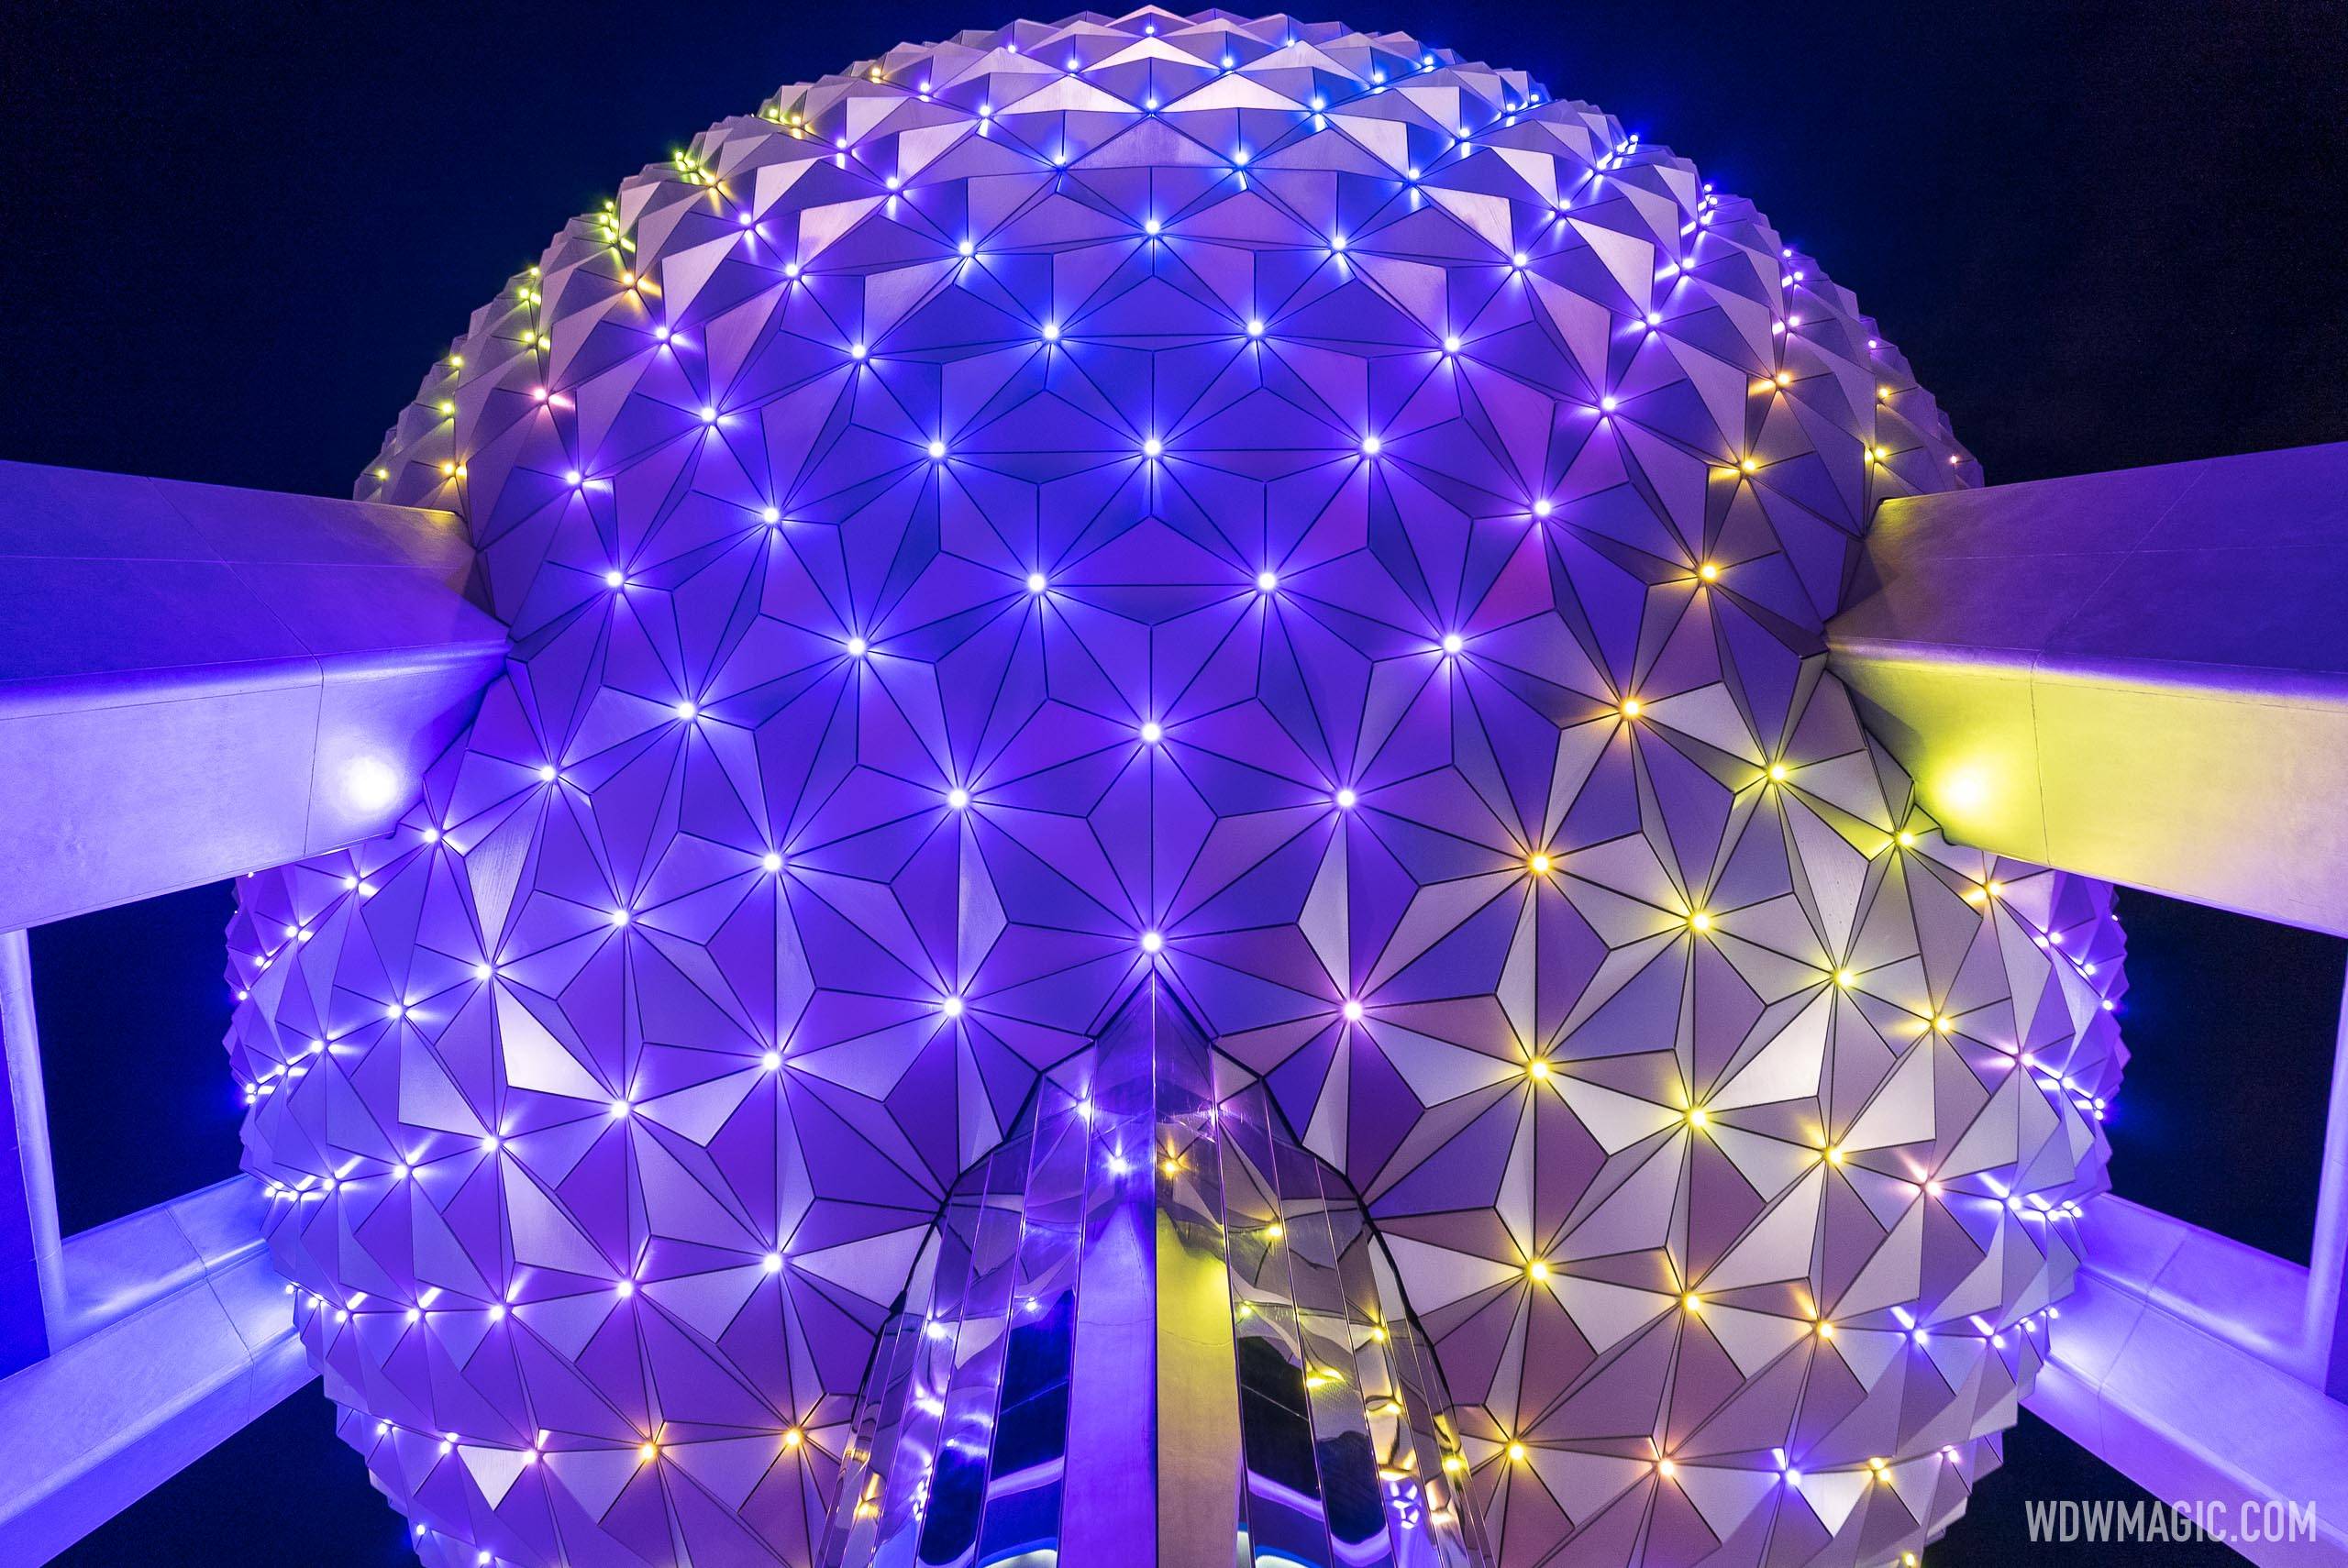 New lighting sequence coming to Spaceship Earth to celebrate the opening of Disney's latest movie 'Wish'